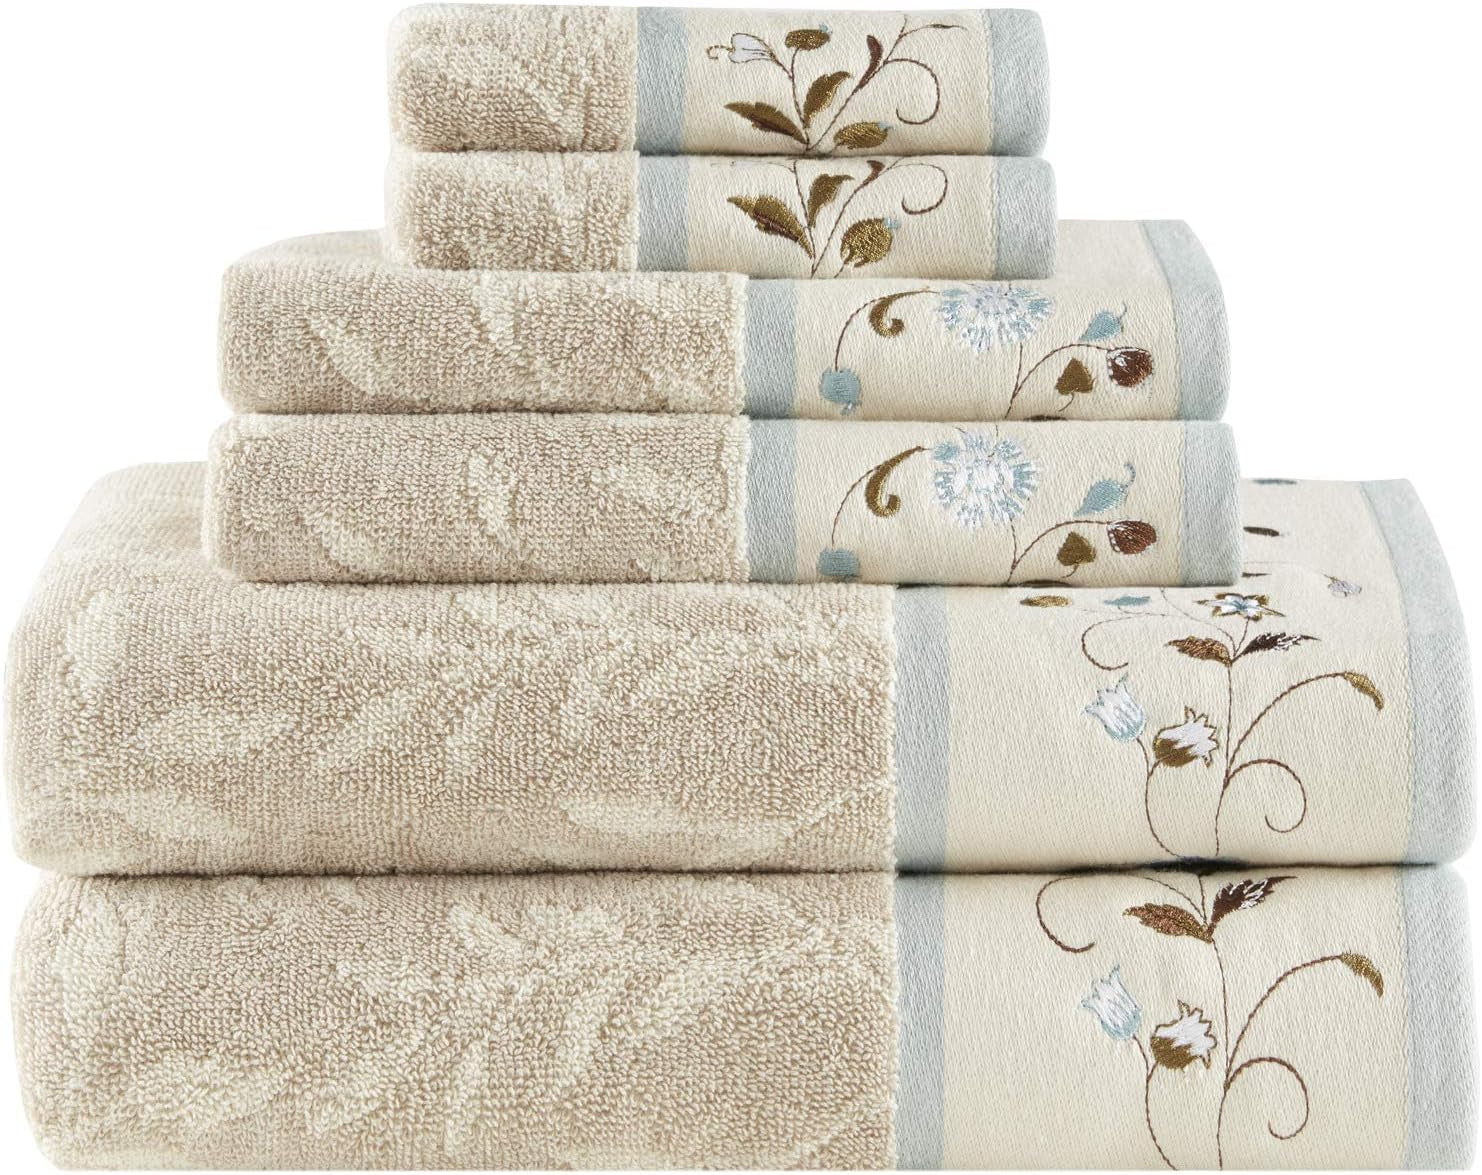 Serene 100% Cotton Bath Towel Set Luxurious Floral Embroidered Cotton Jacquard Design, Soft and Highly Absorbent for Shower, Multi-Sizes, Blue, 4